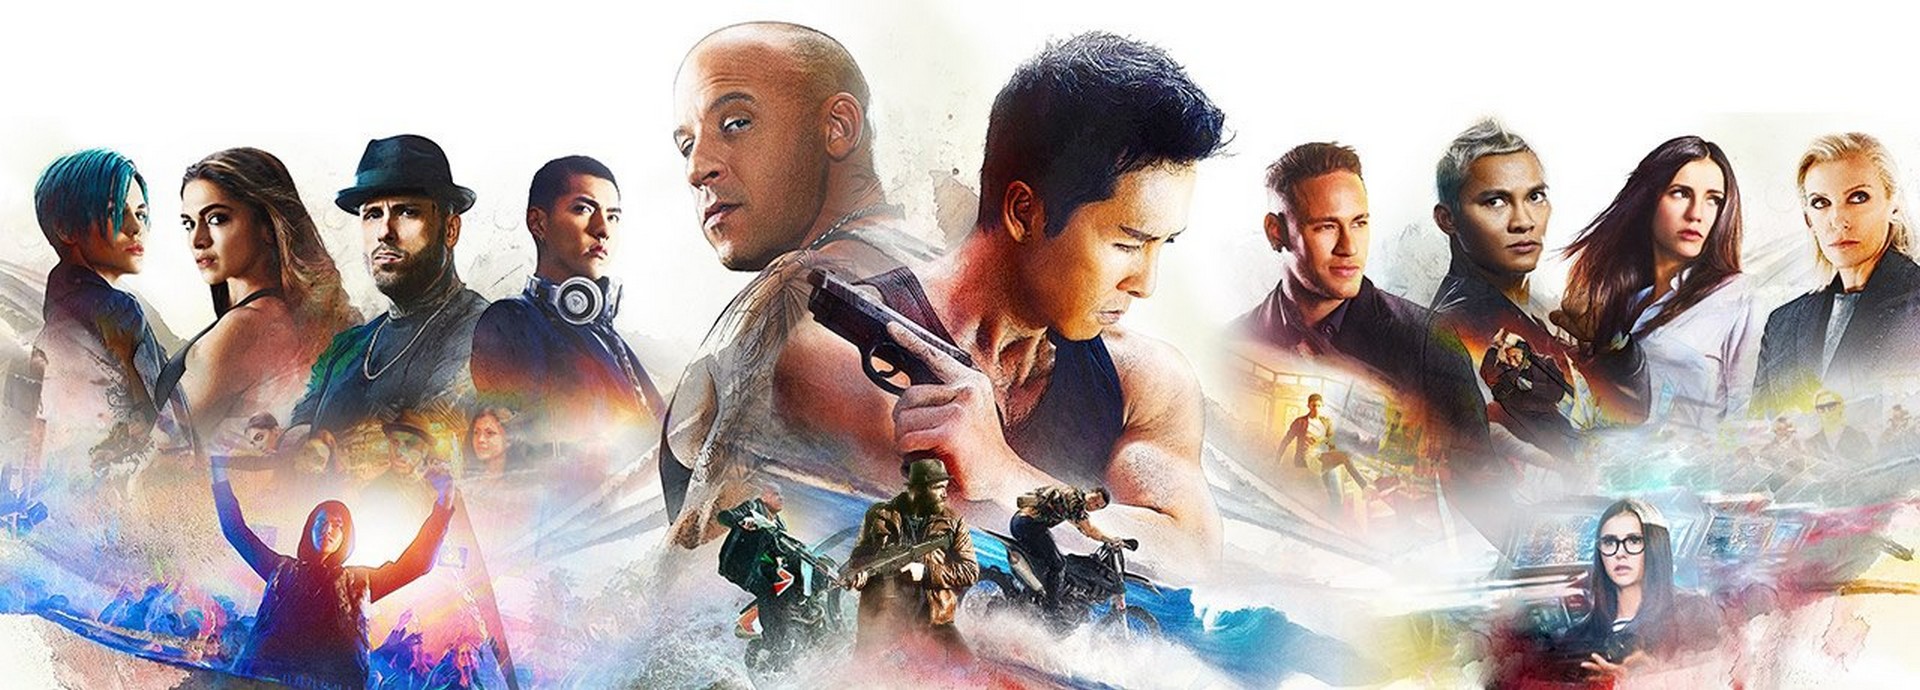 Xxx Return Of Xander Cage - Xxx Return Of Xander Cage Movie , HD Wallpaper & Backgrounds